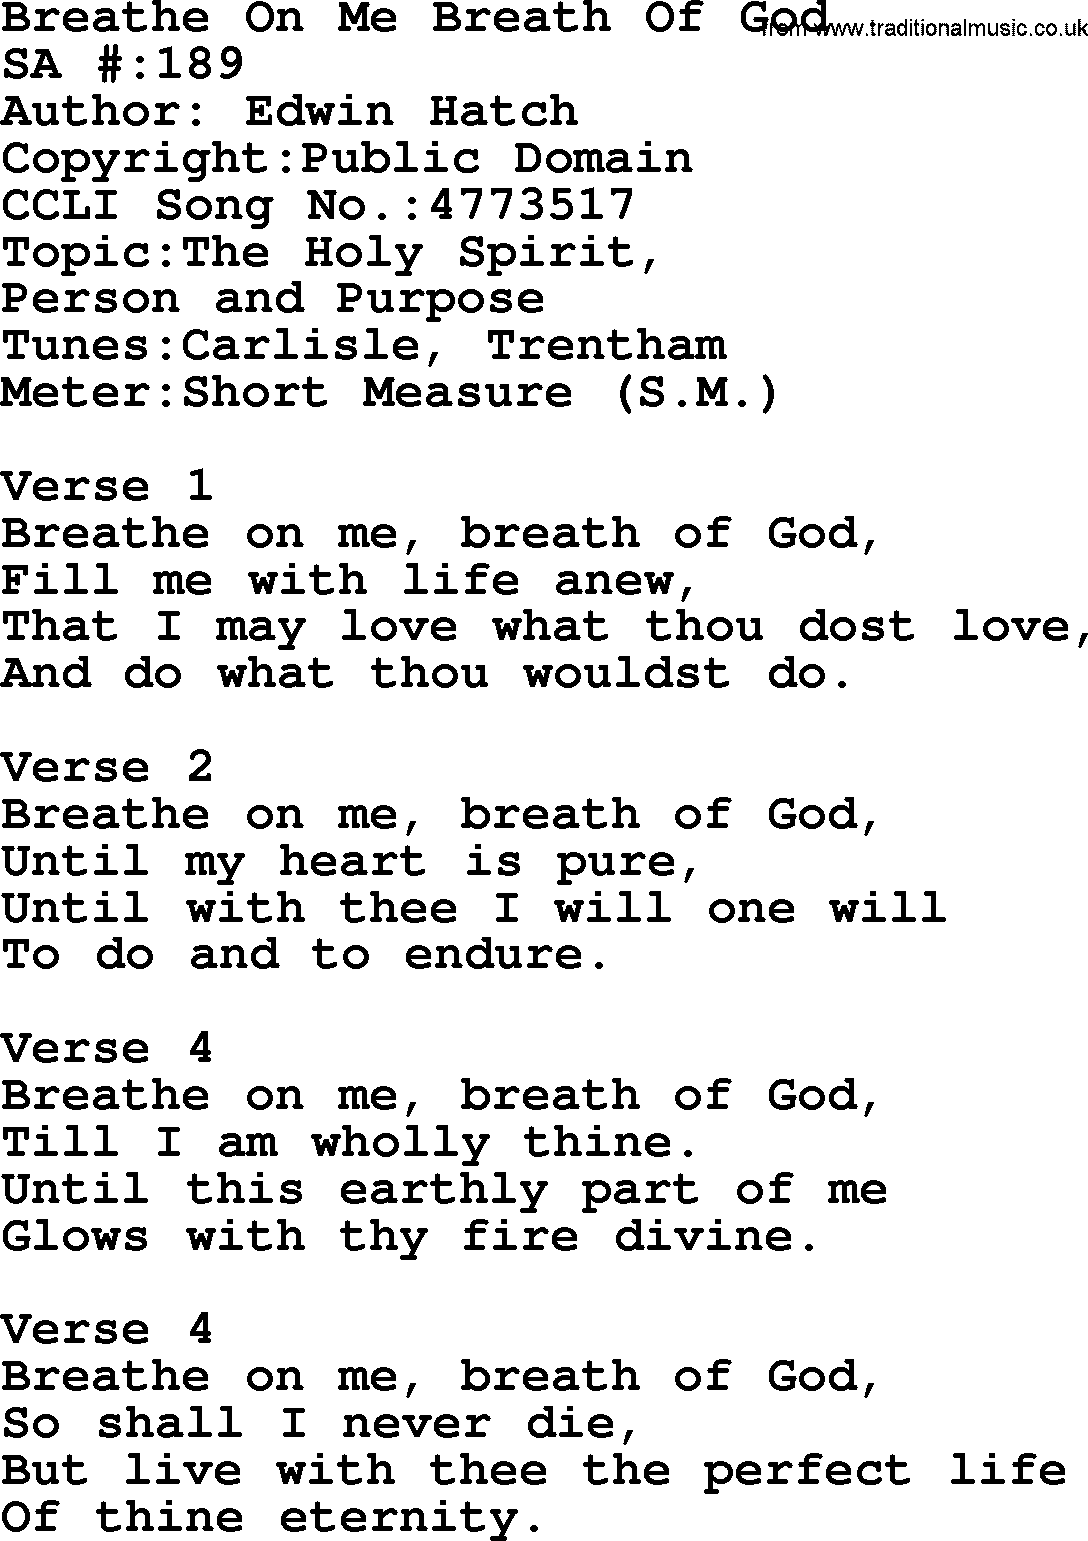 Salvation Army Hymnal, title: Breathe On Me Breath Of God, with lyrics and PDF,